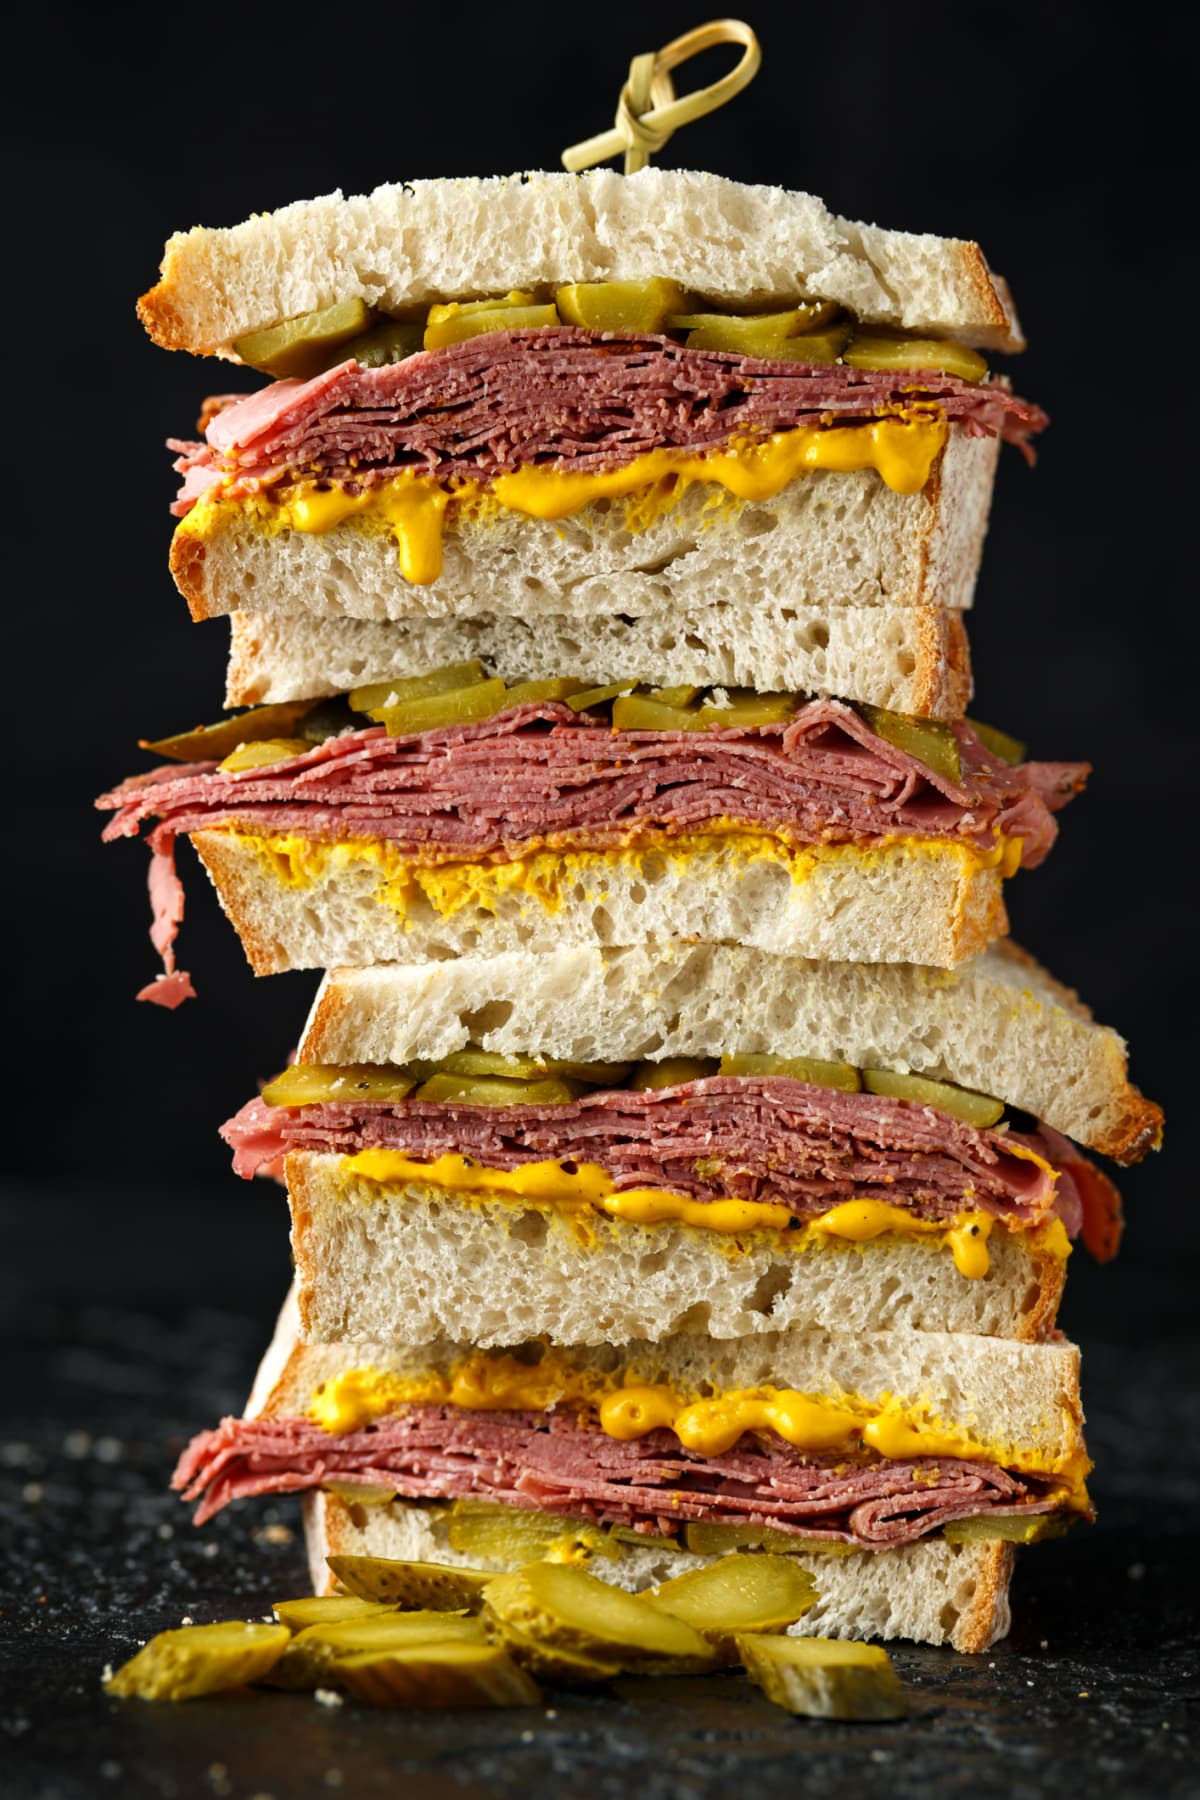 New York pastrami, gherkins, and sourdough bread deli sandwich with pickles